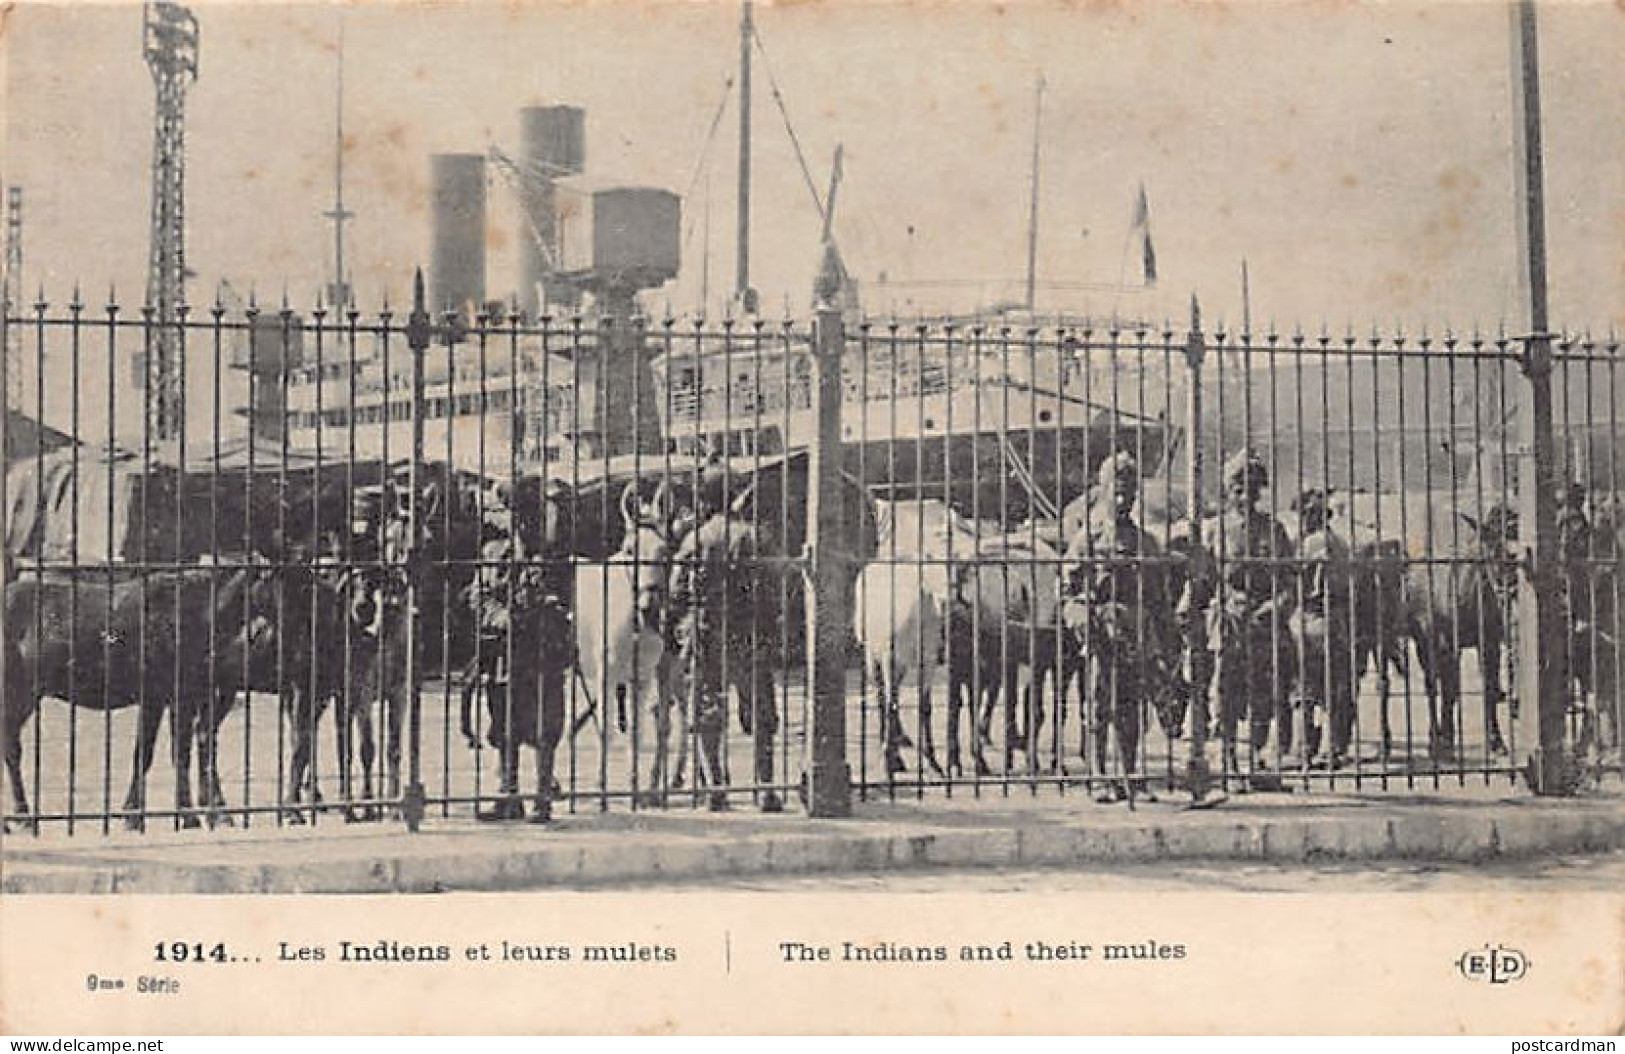 India - Indian Expeditionary Force - Indian Troops And Their Mules Landing In Marseille, France - Publ. E.L.D. 9ème Séri - India